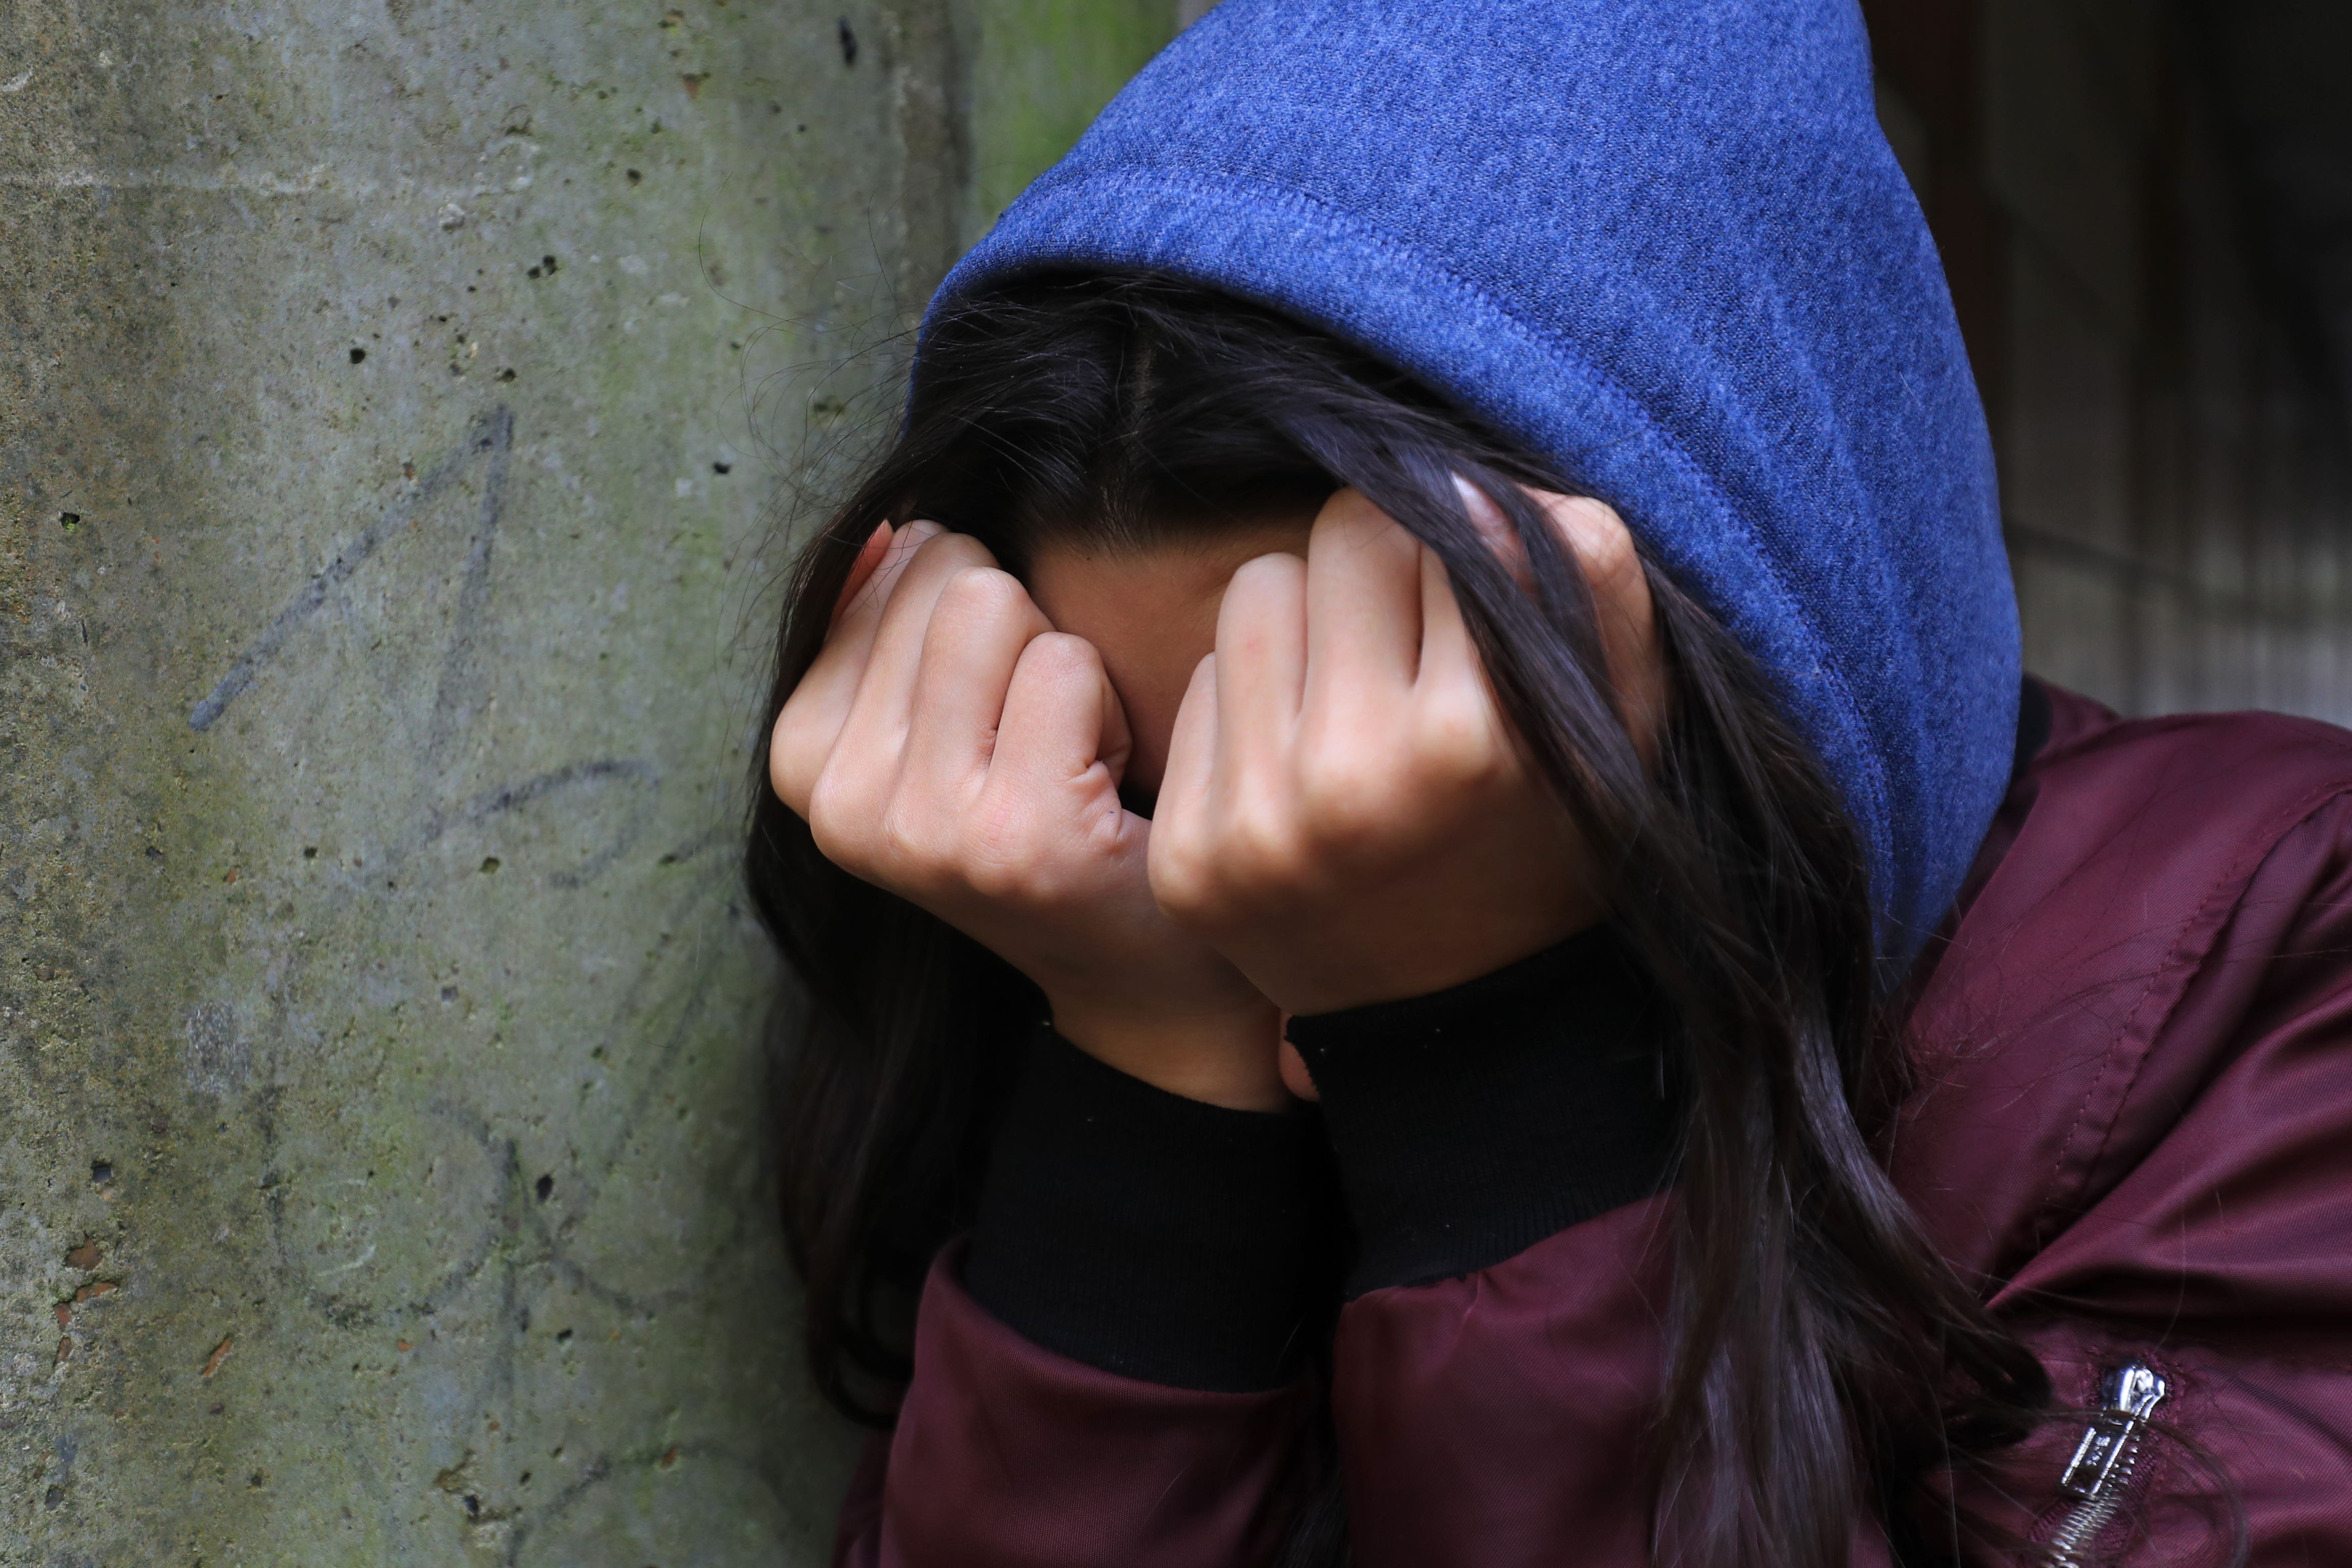 pa ready, children, nhs england, covid, children face ‘significant challenges’ accessing mental health support – charity